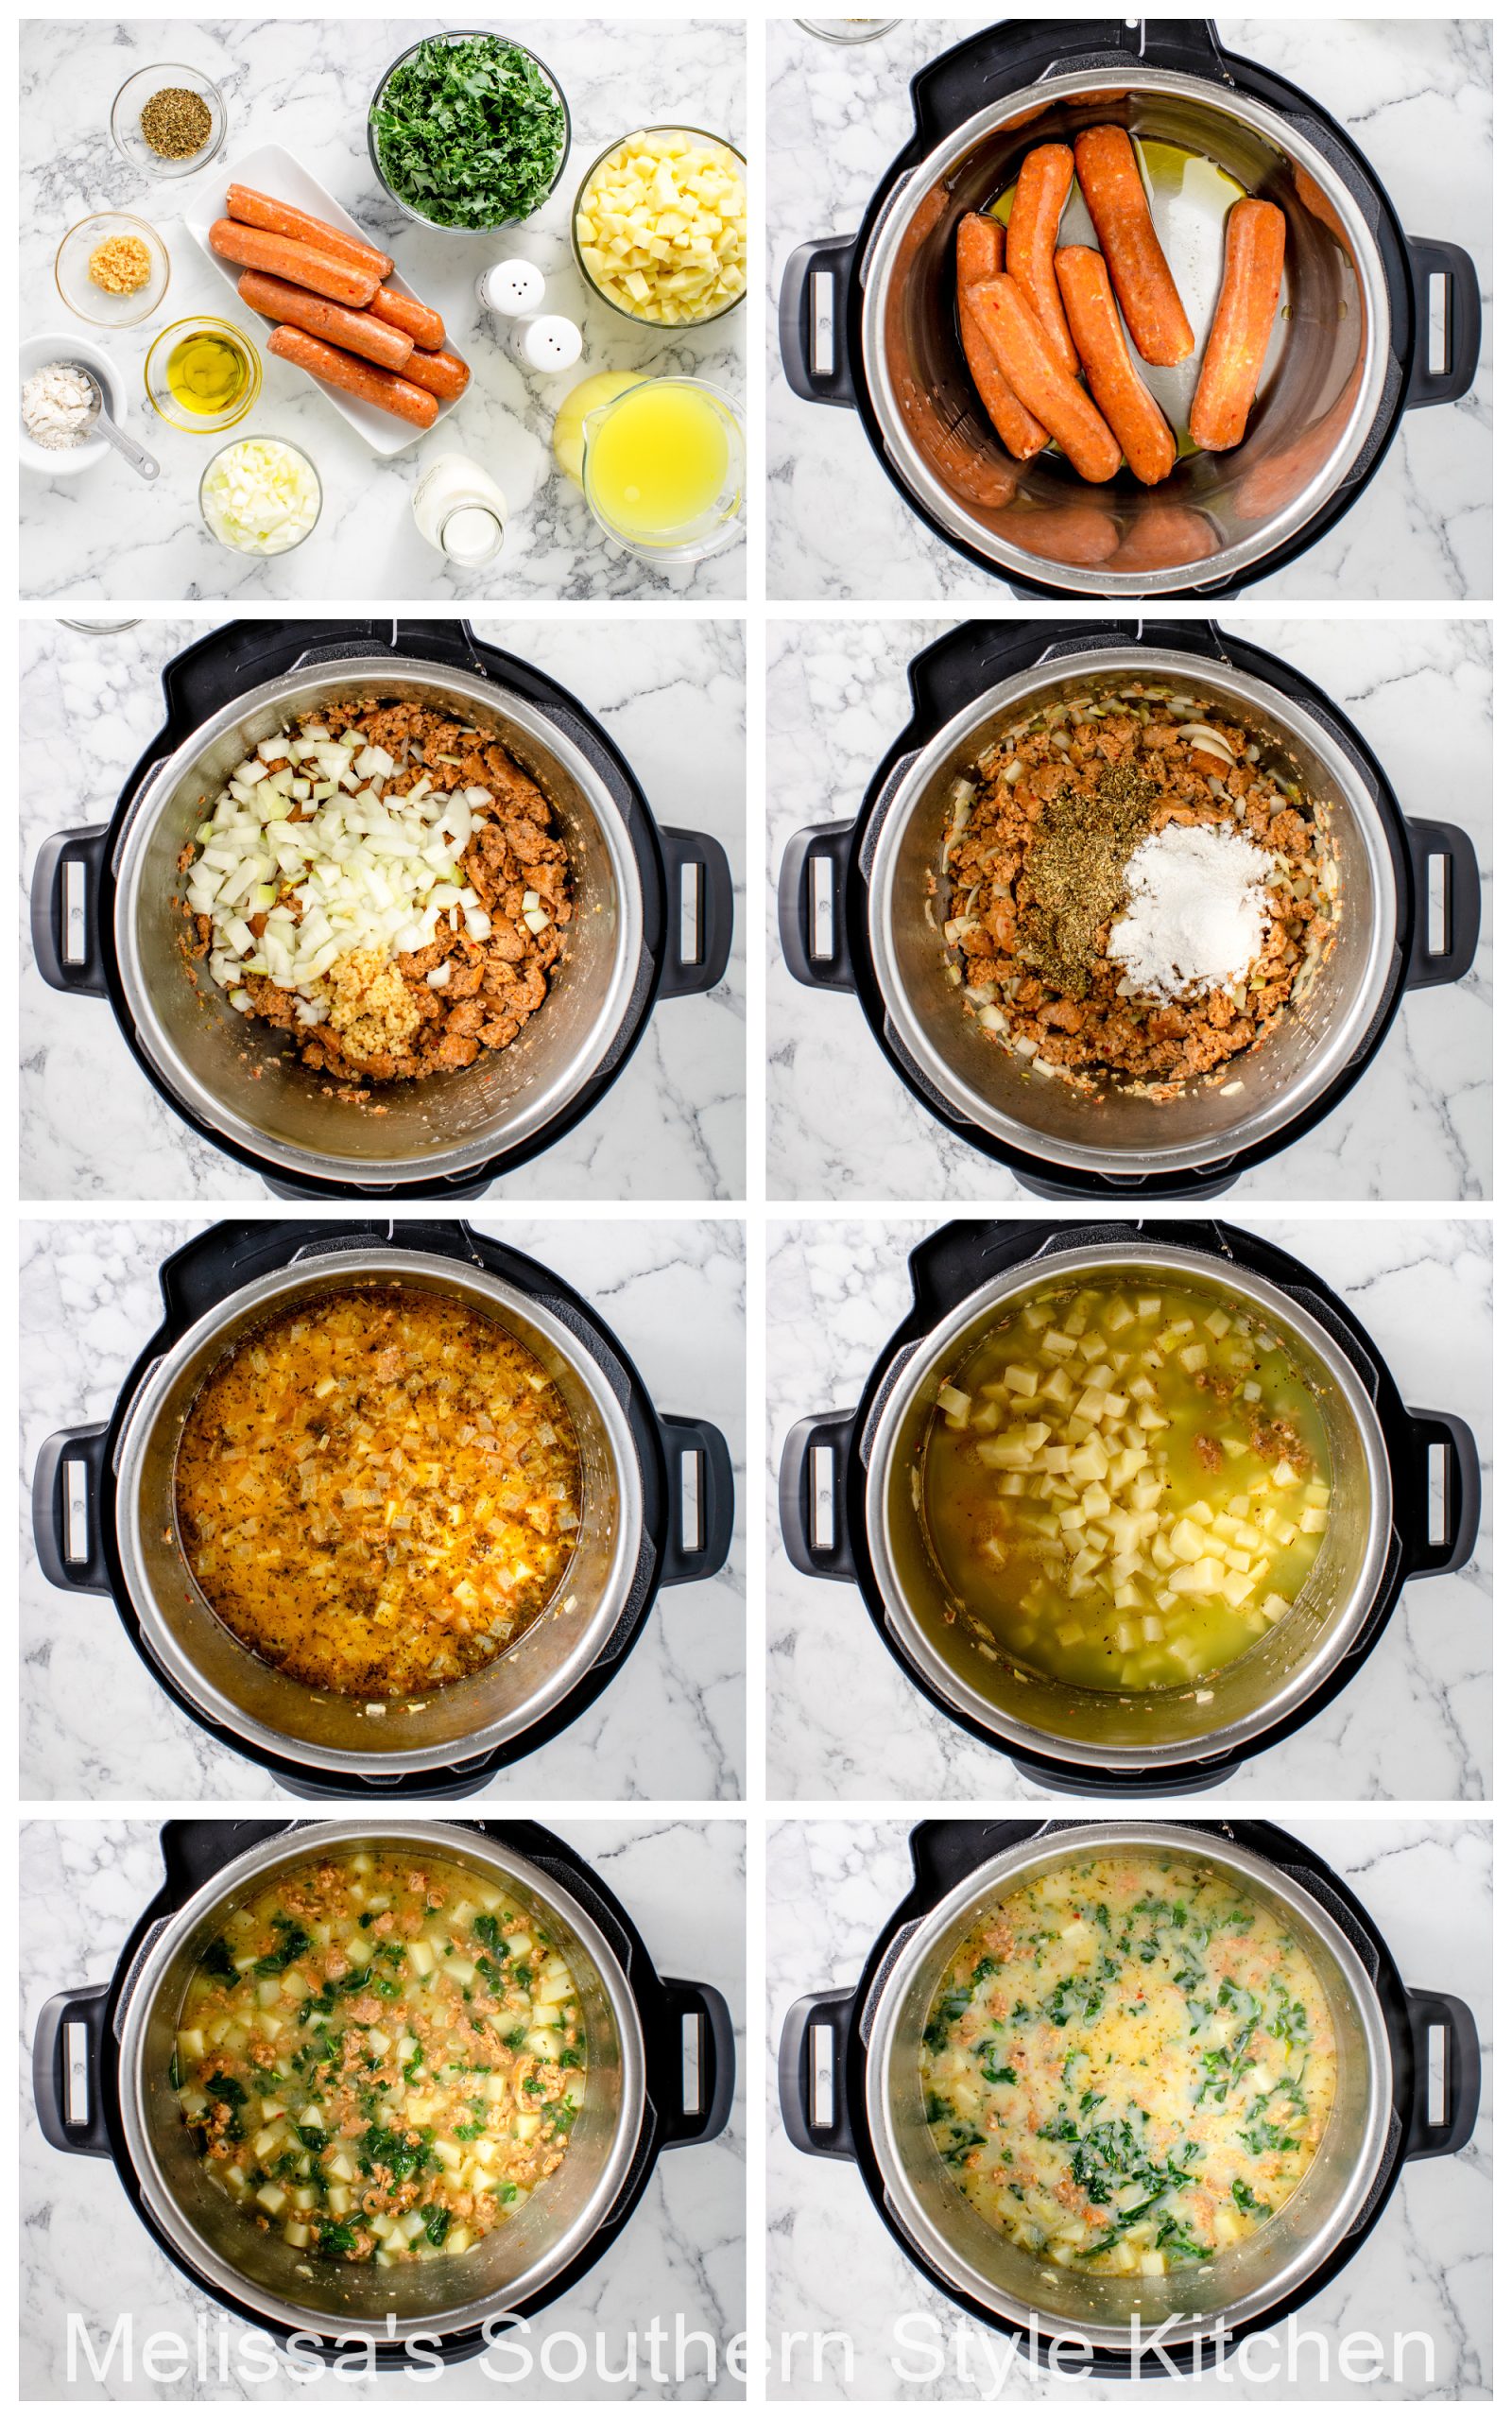 ingredients-to-make-zuppa-toscana-in-order